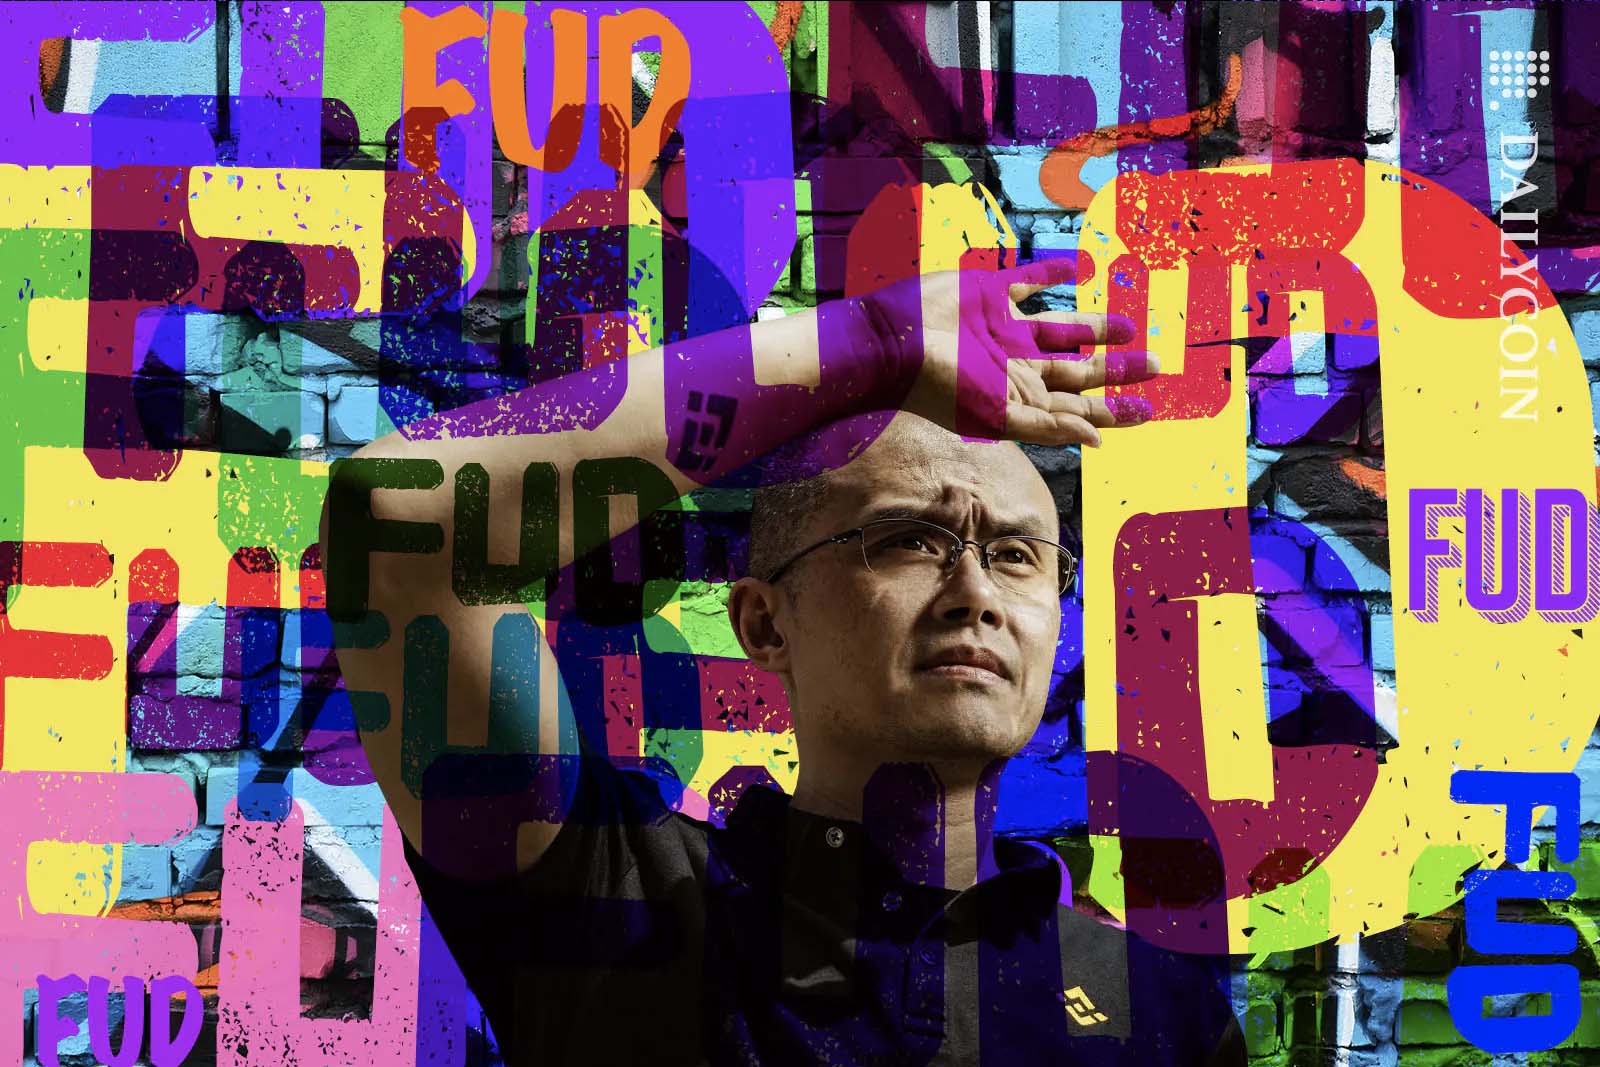 Changpeng Zhao of Binance is surrounded by colourful typograpy "FUD, FUD, FUD".